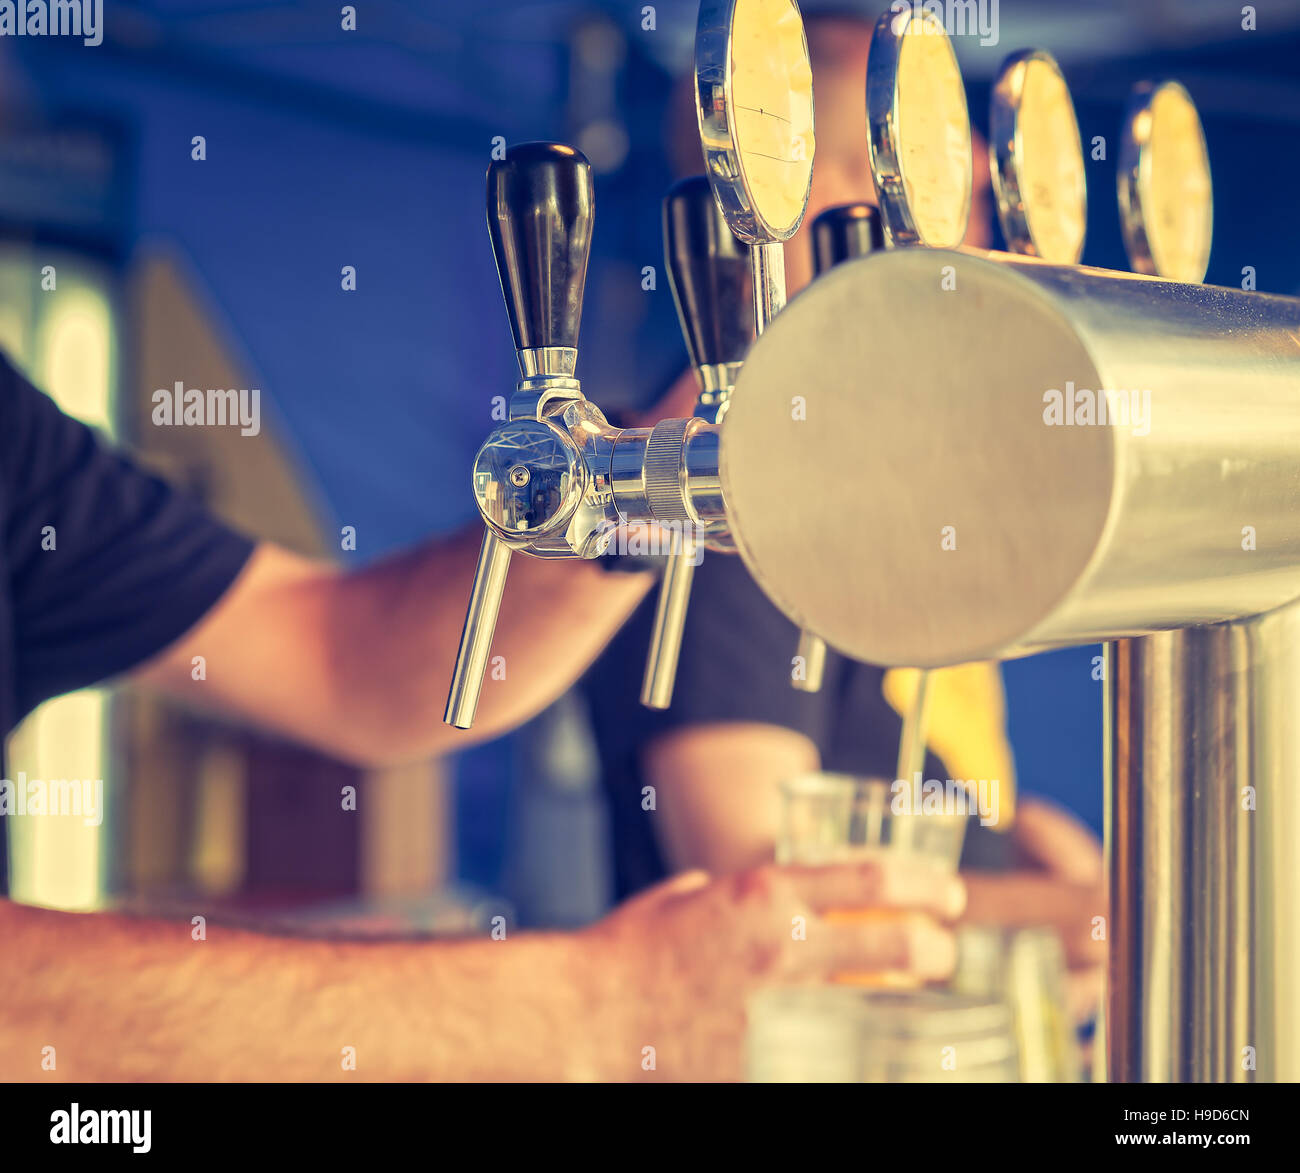 Barman hand at beer tap pouring a draught lager beer serving in a restaurant or pub.Vintage look Stock Photo